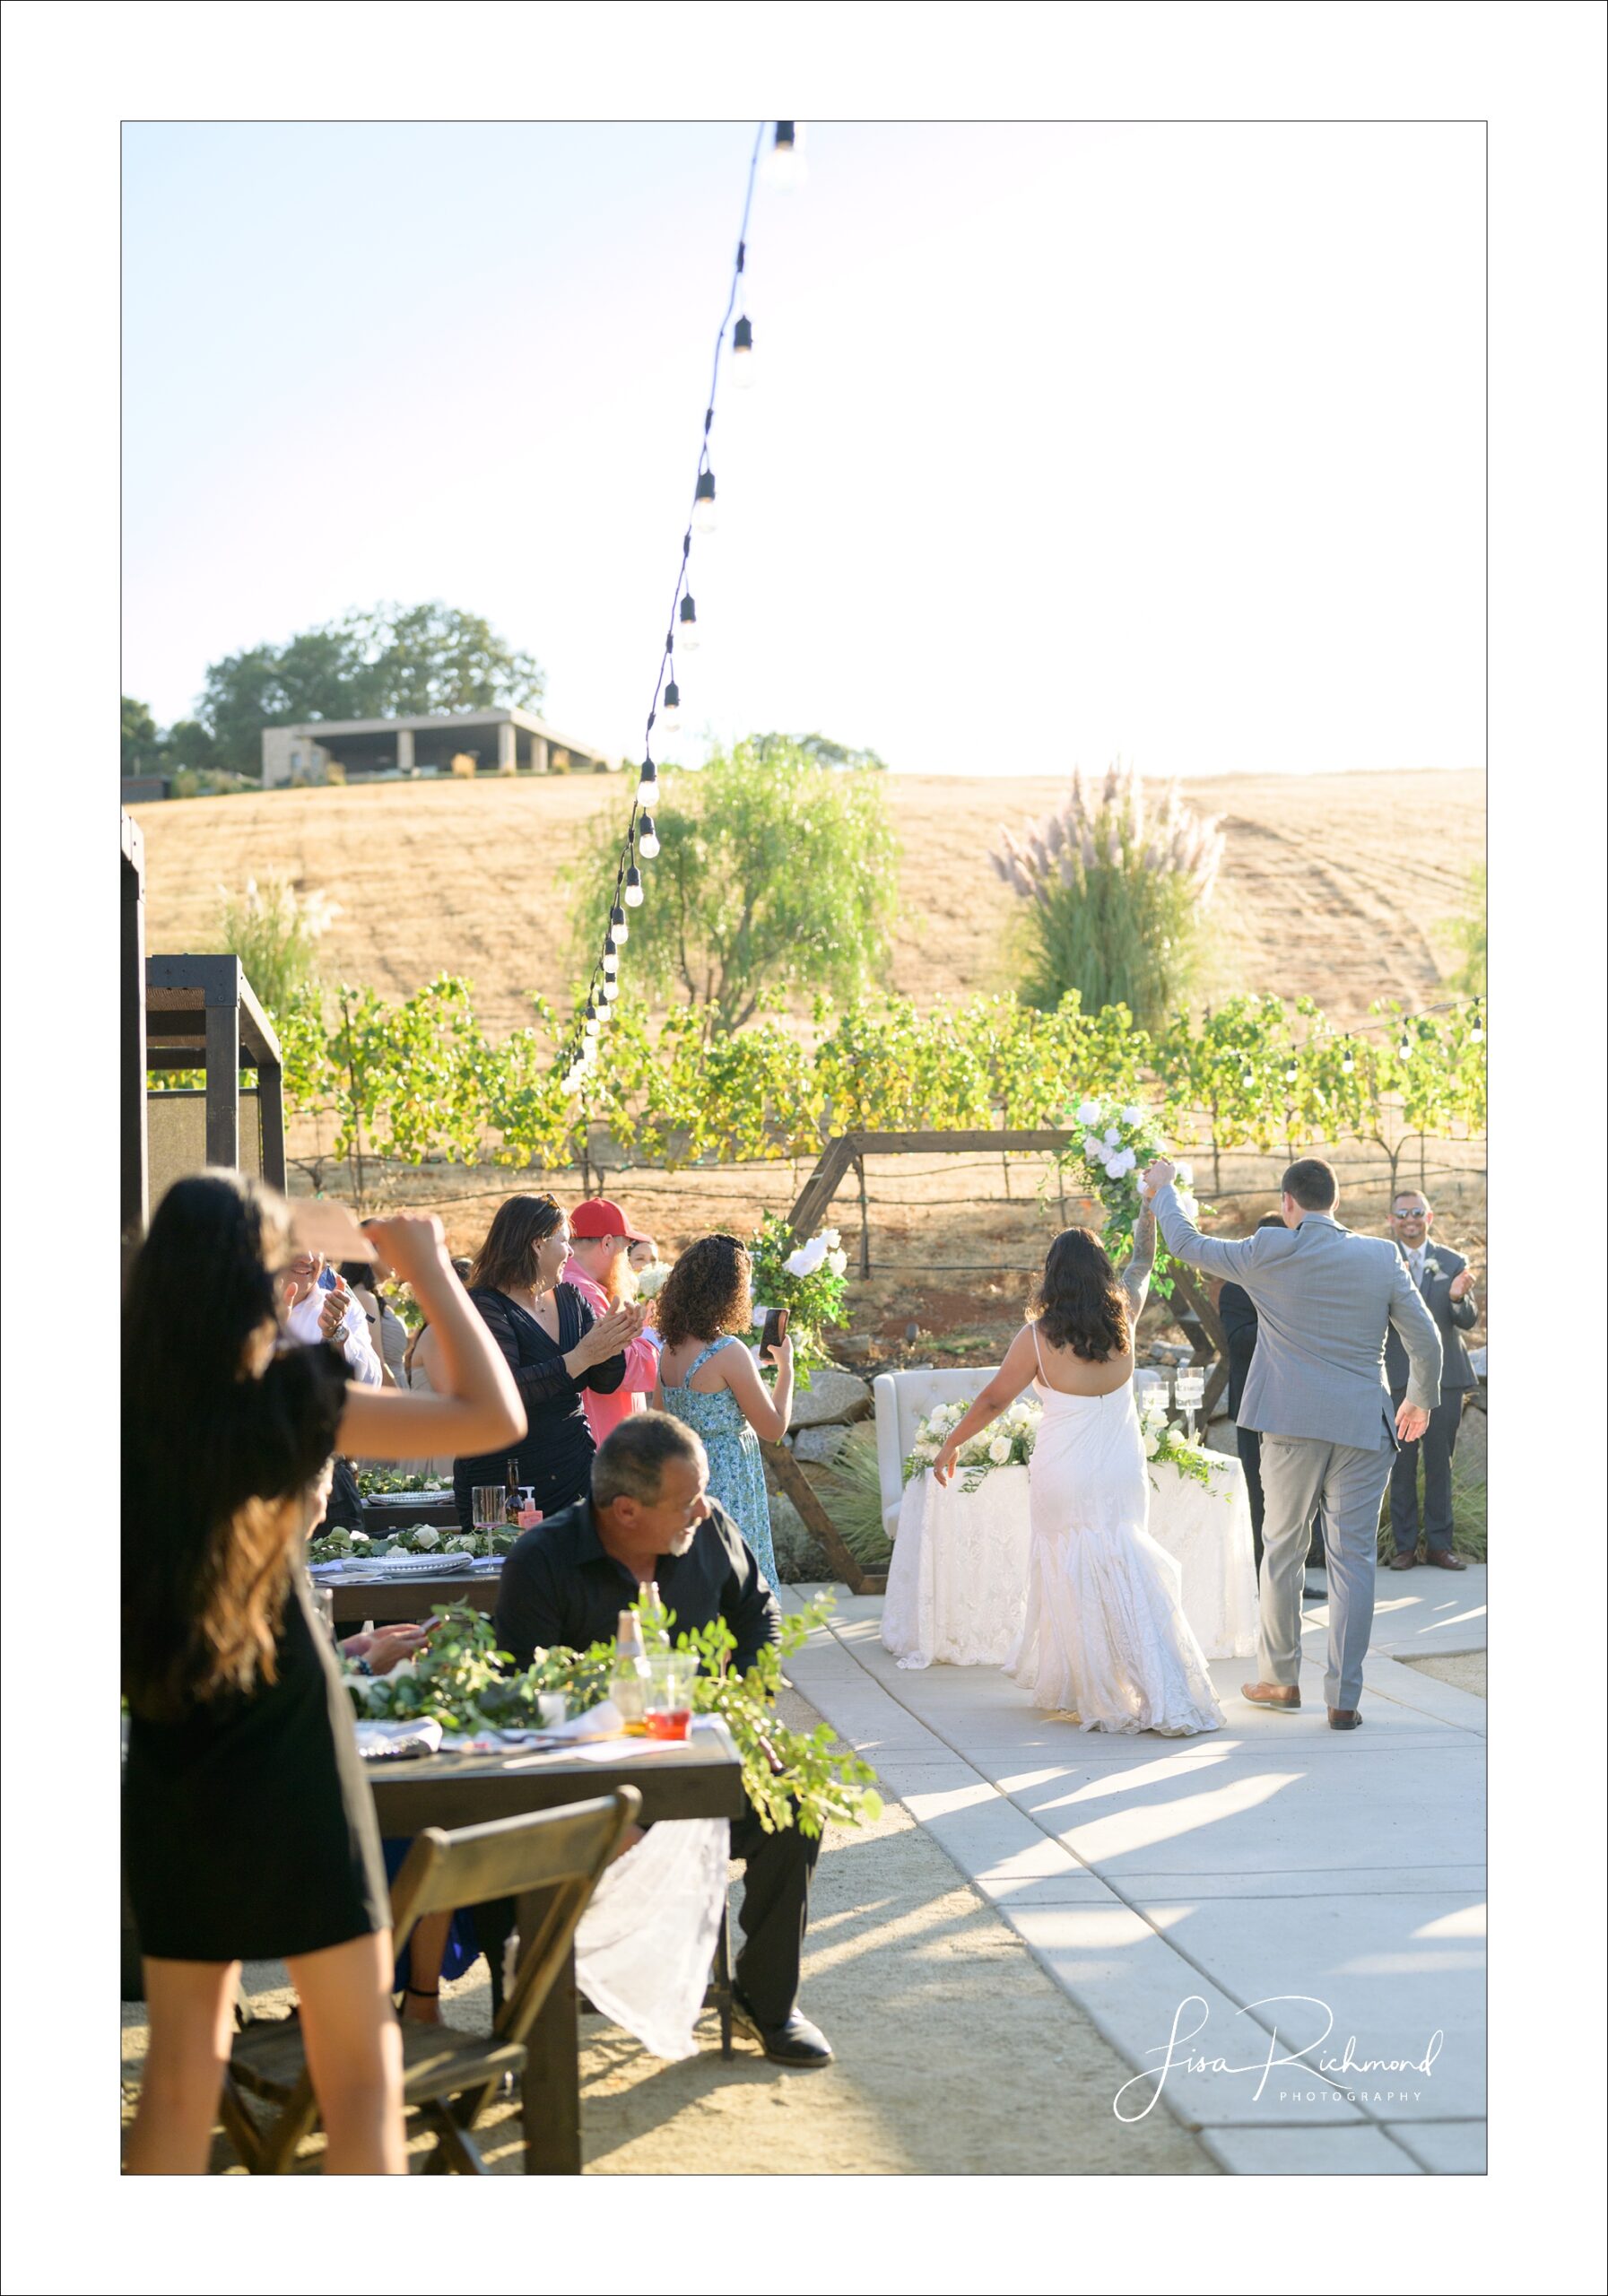 Jessica and Cory celebrate their wedding day at Black Oak Mountain Vineyards